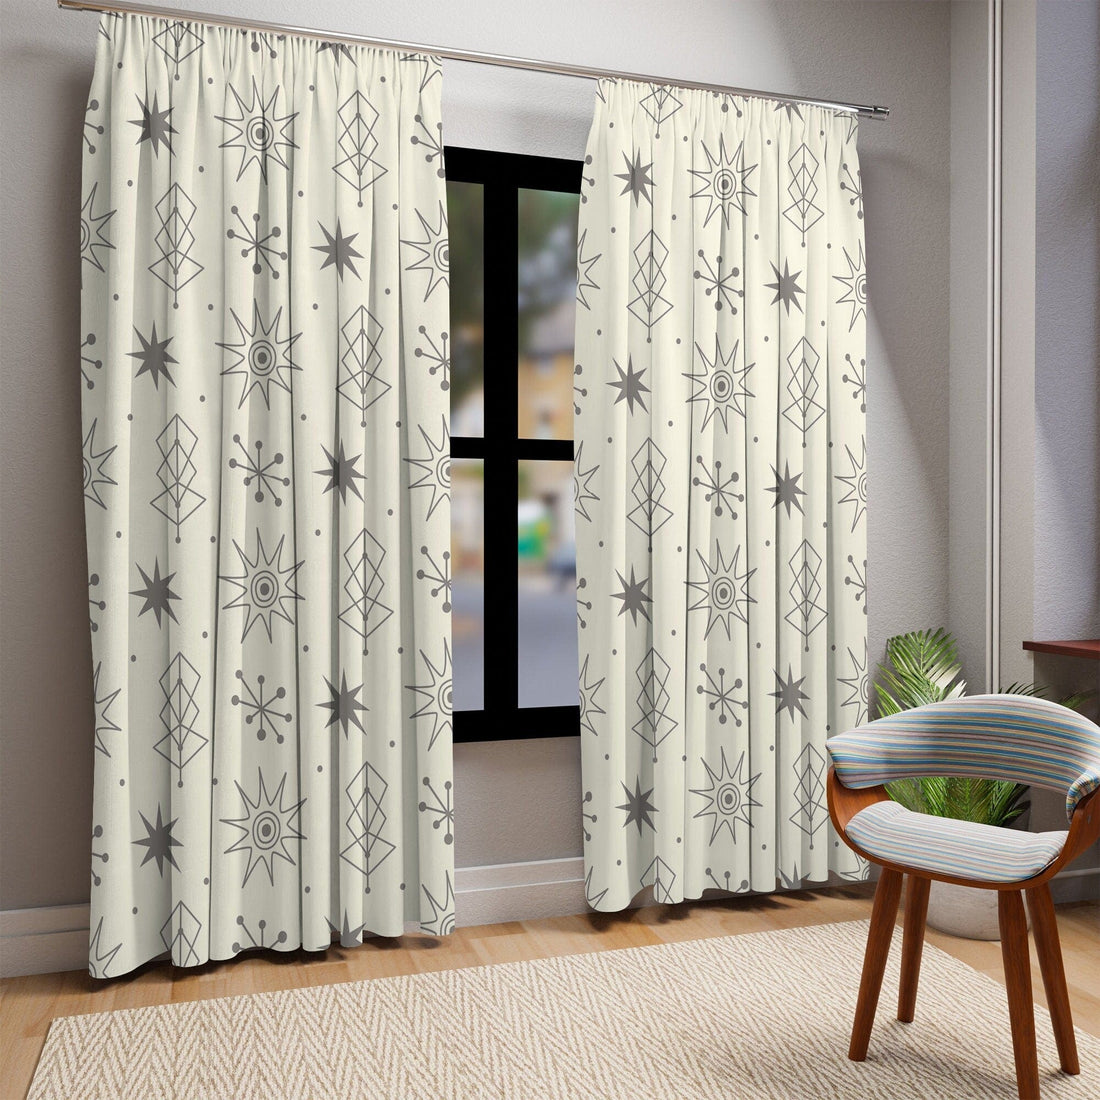 Kate McEnroe New York Retro 1950s Window Curtains, Mid Century Modern Atomic Starburst Beige, Gray Blackout or Sheer Curtain PanelsWindow CurtainsW3S - GRY - CRE - SH4